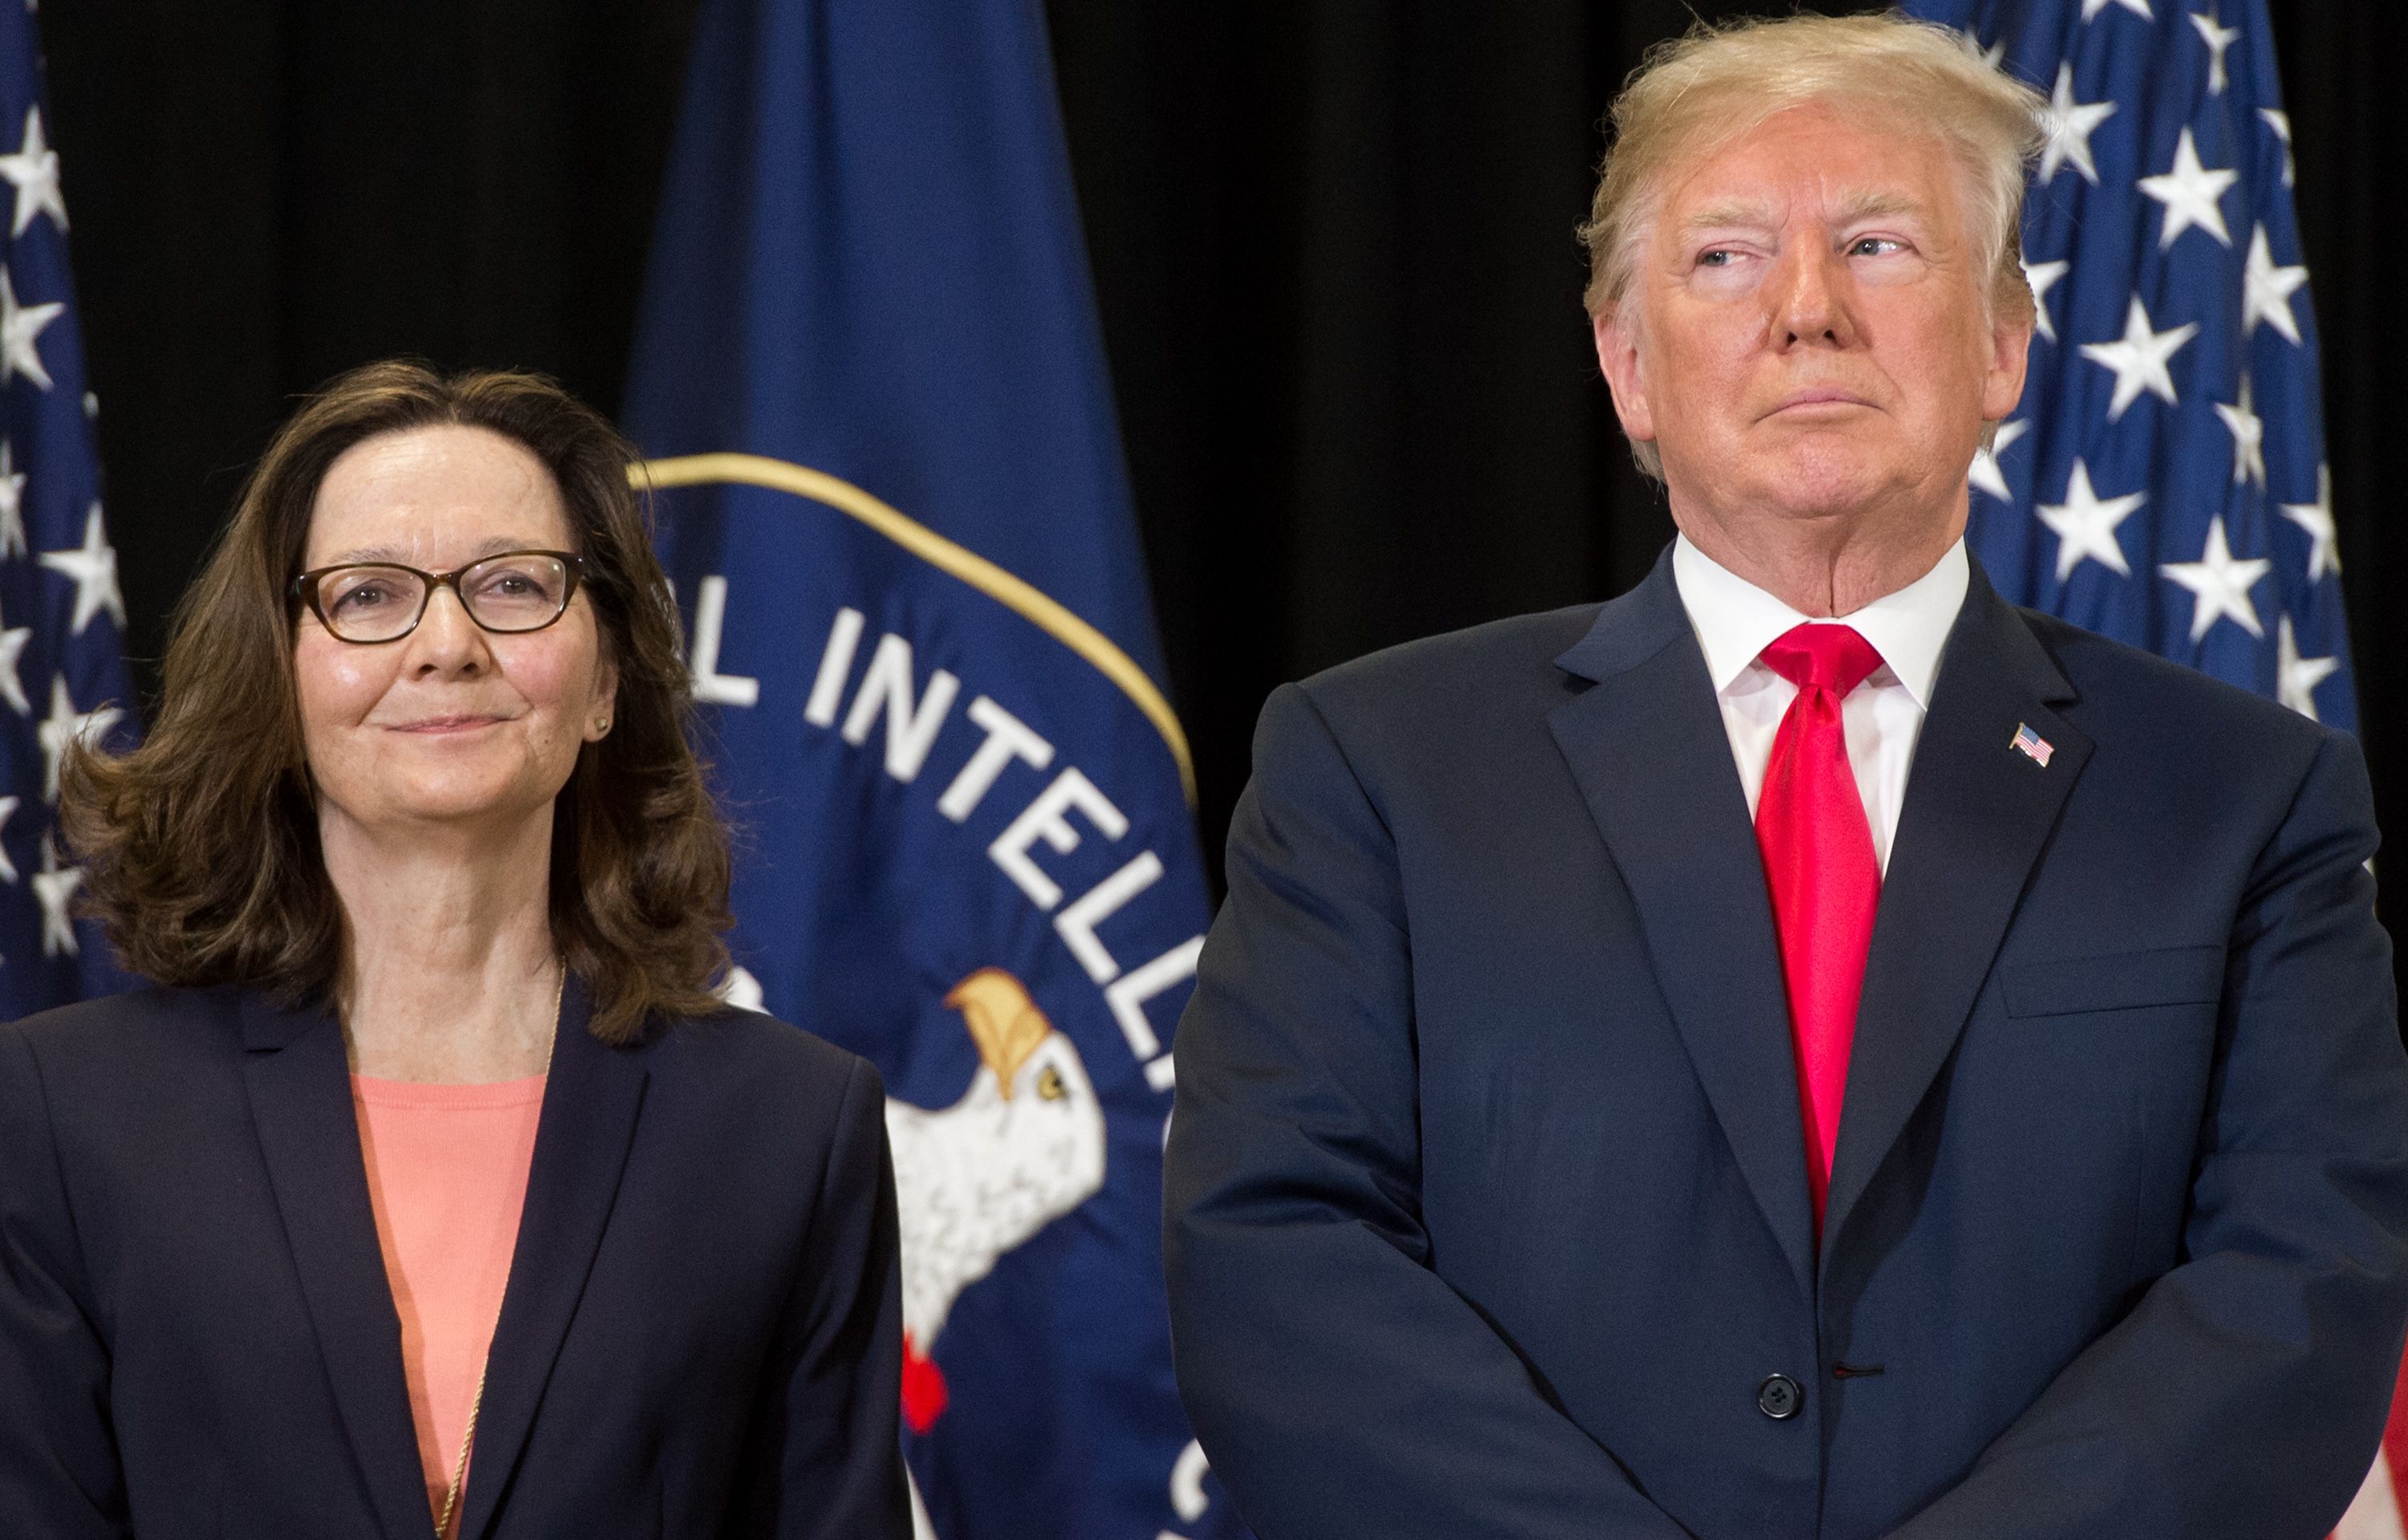 US President Donald Trump attends Gina Haspel's swearing-in as CIA director